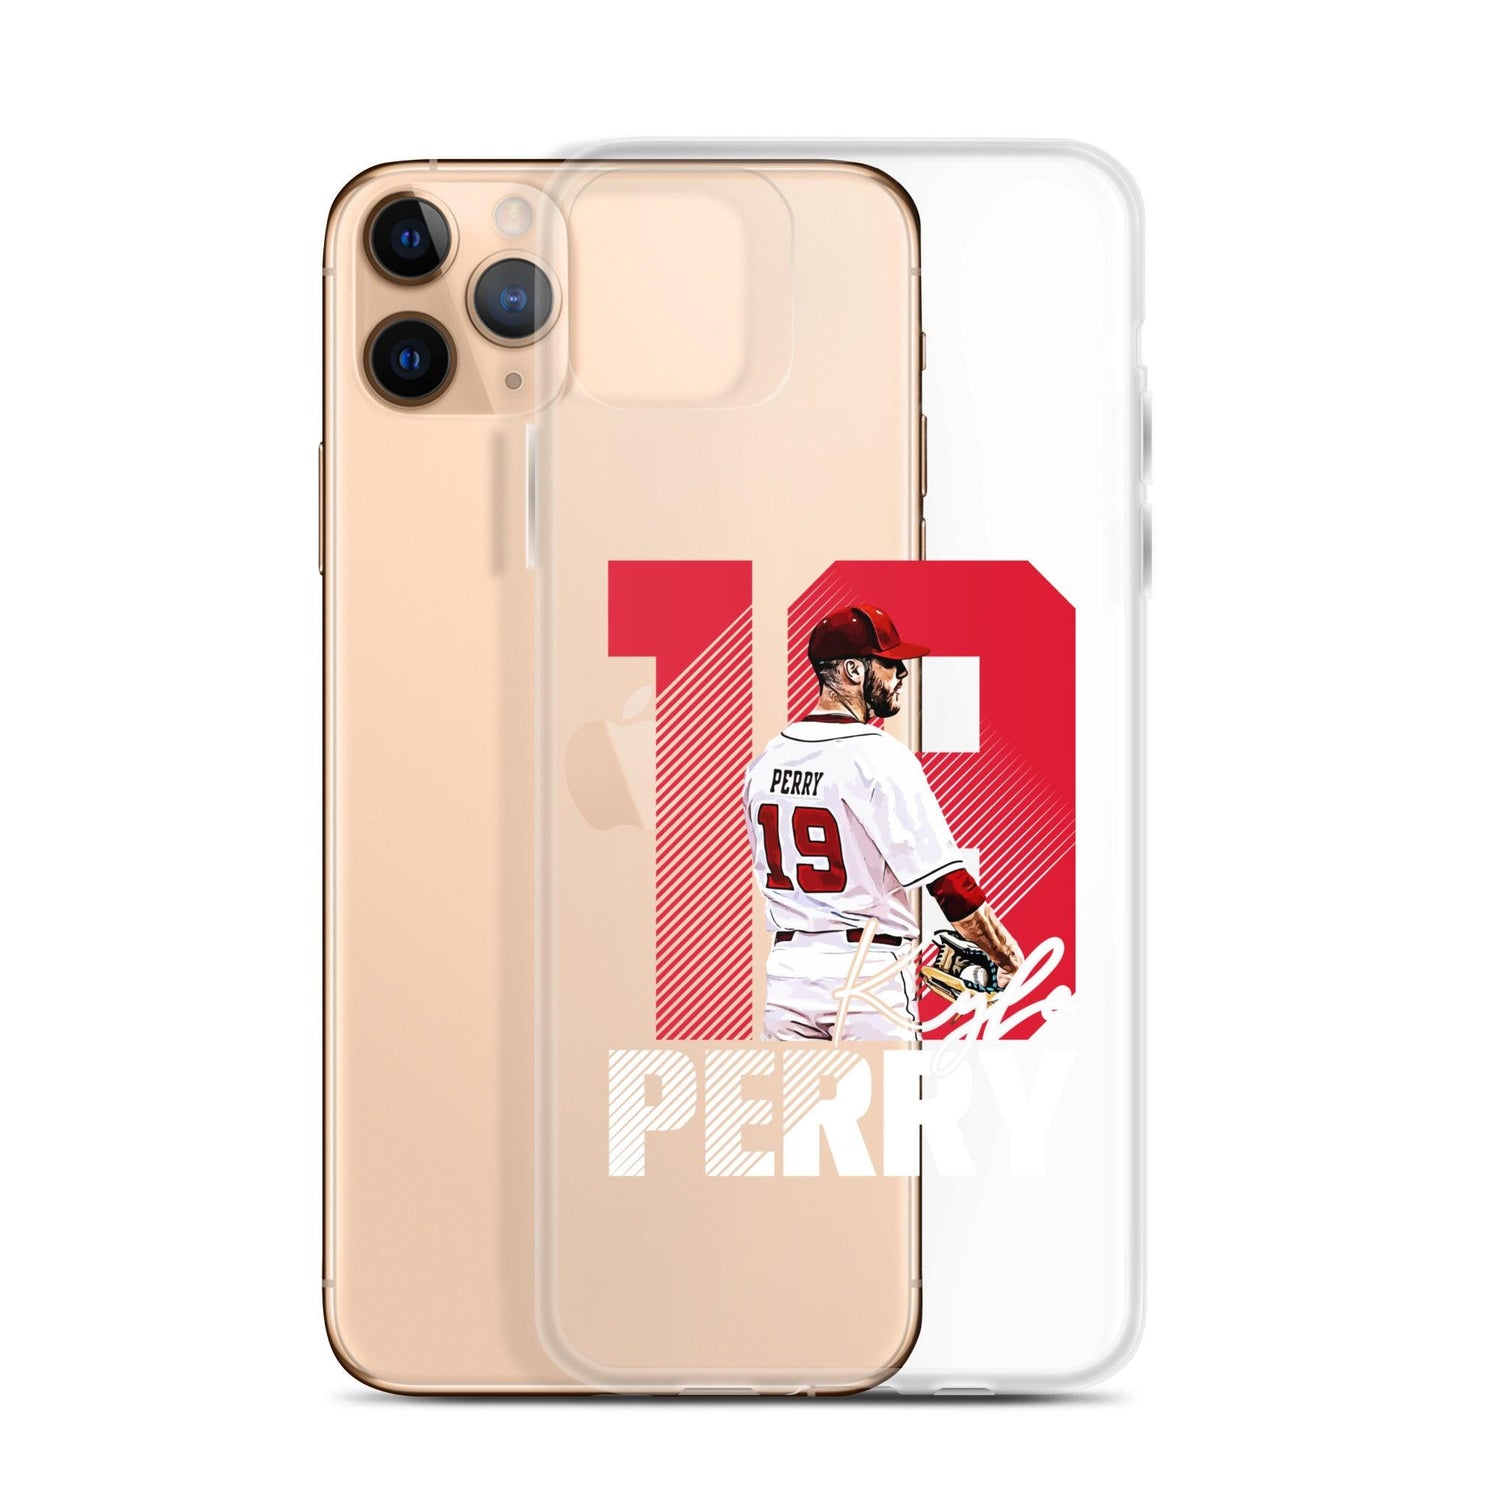 Kyle Perry "Gameday" iPhone Case - Fan Arch